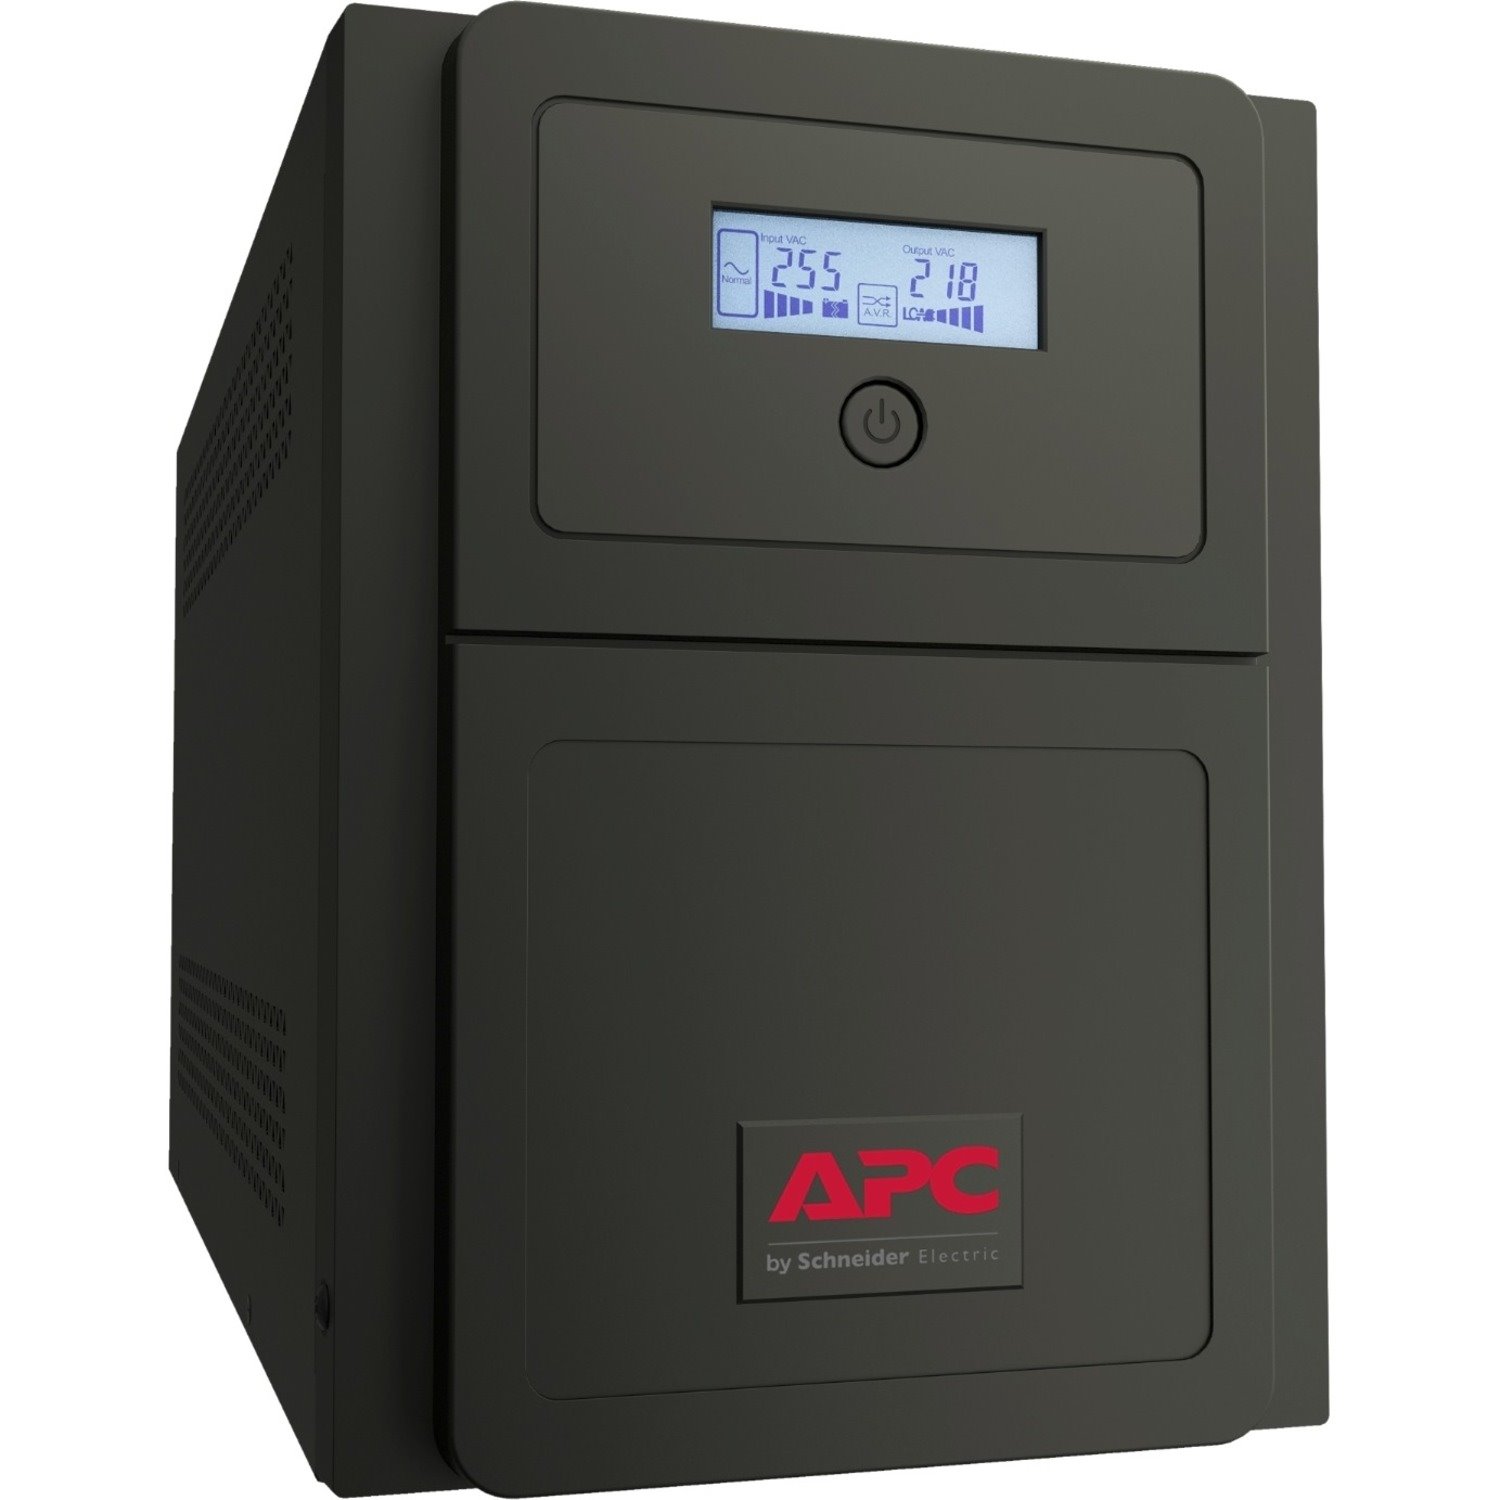 APC by Schneider Electric Easy UPS 1kVA Tower UPS